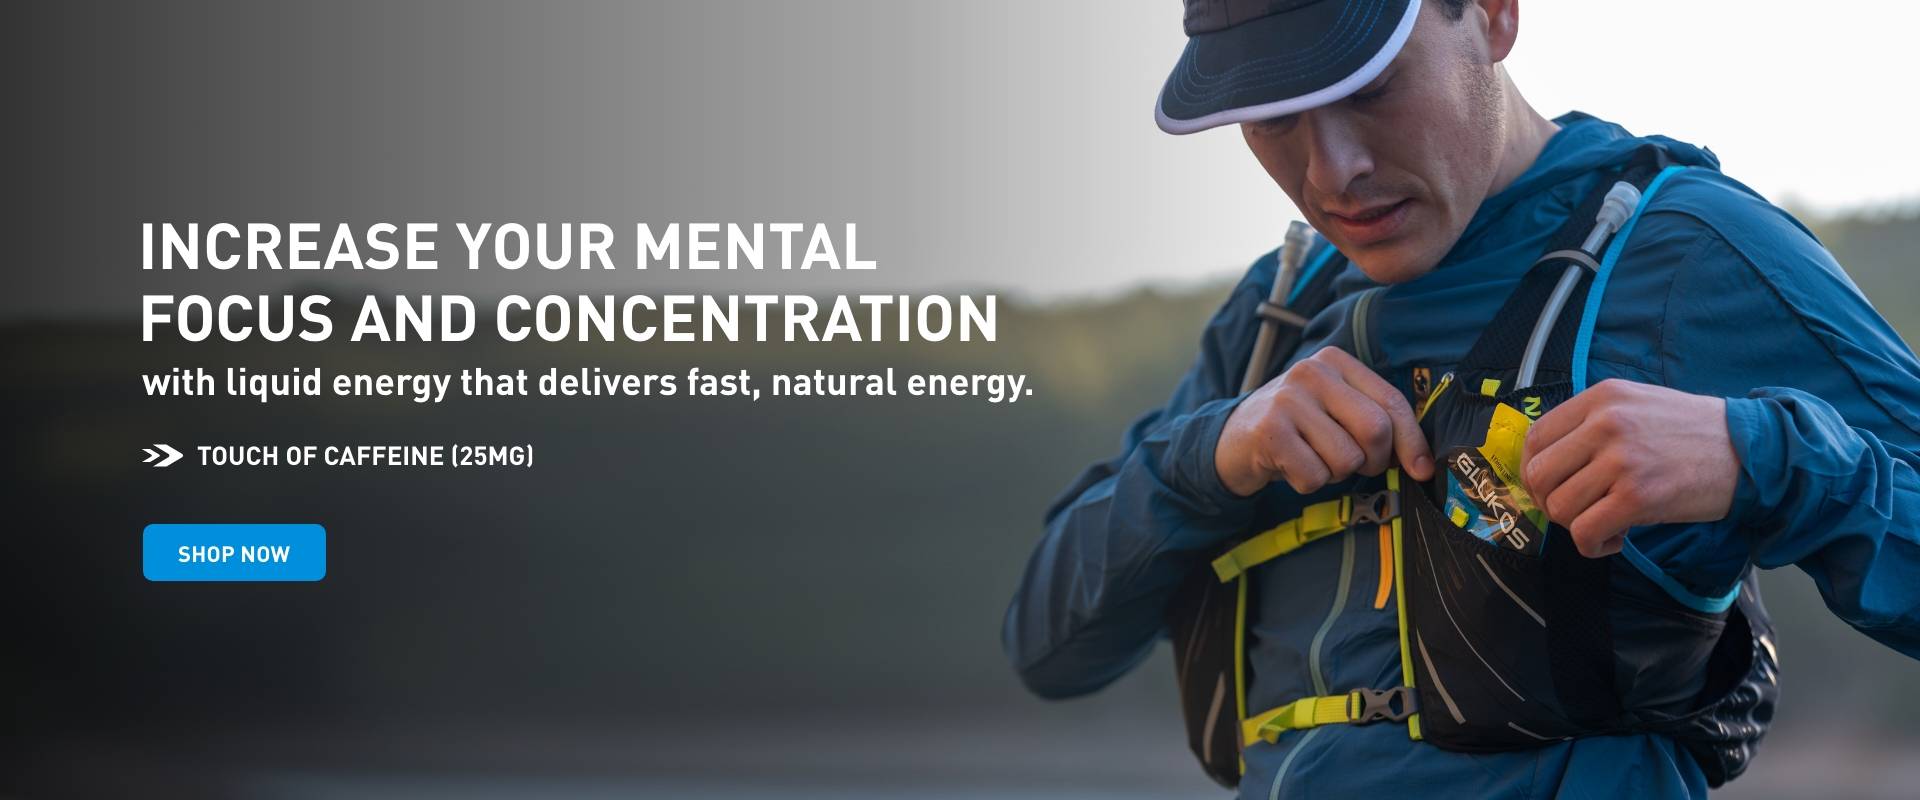 Increase Your Mental Focus and Concentration with liquid energy that delivers fast, natural energy - Touch of Caffeine (25mg) - Shop Now